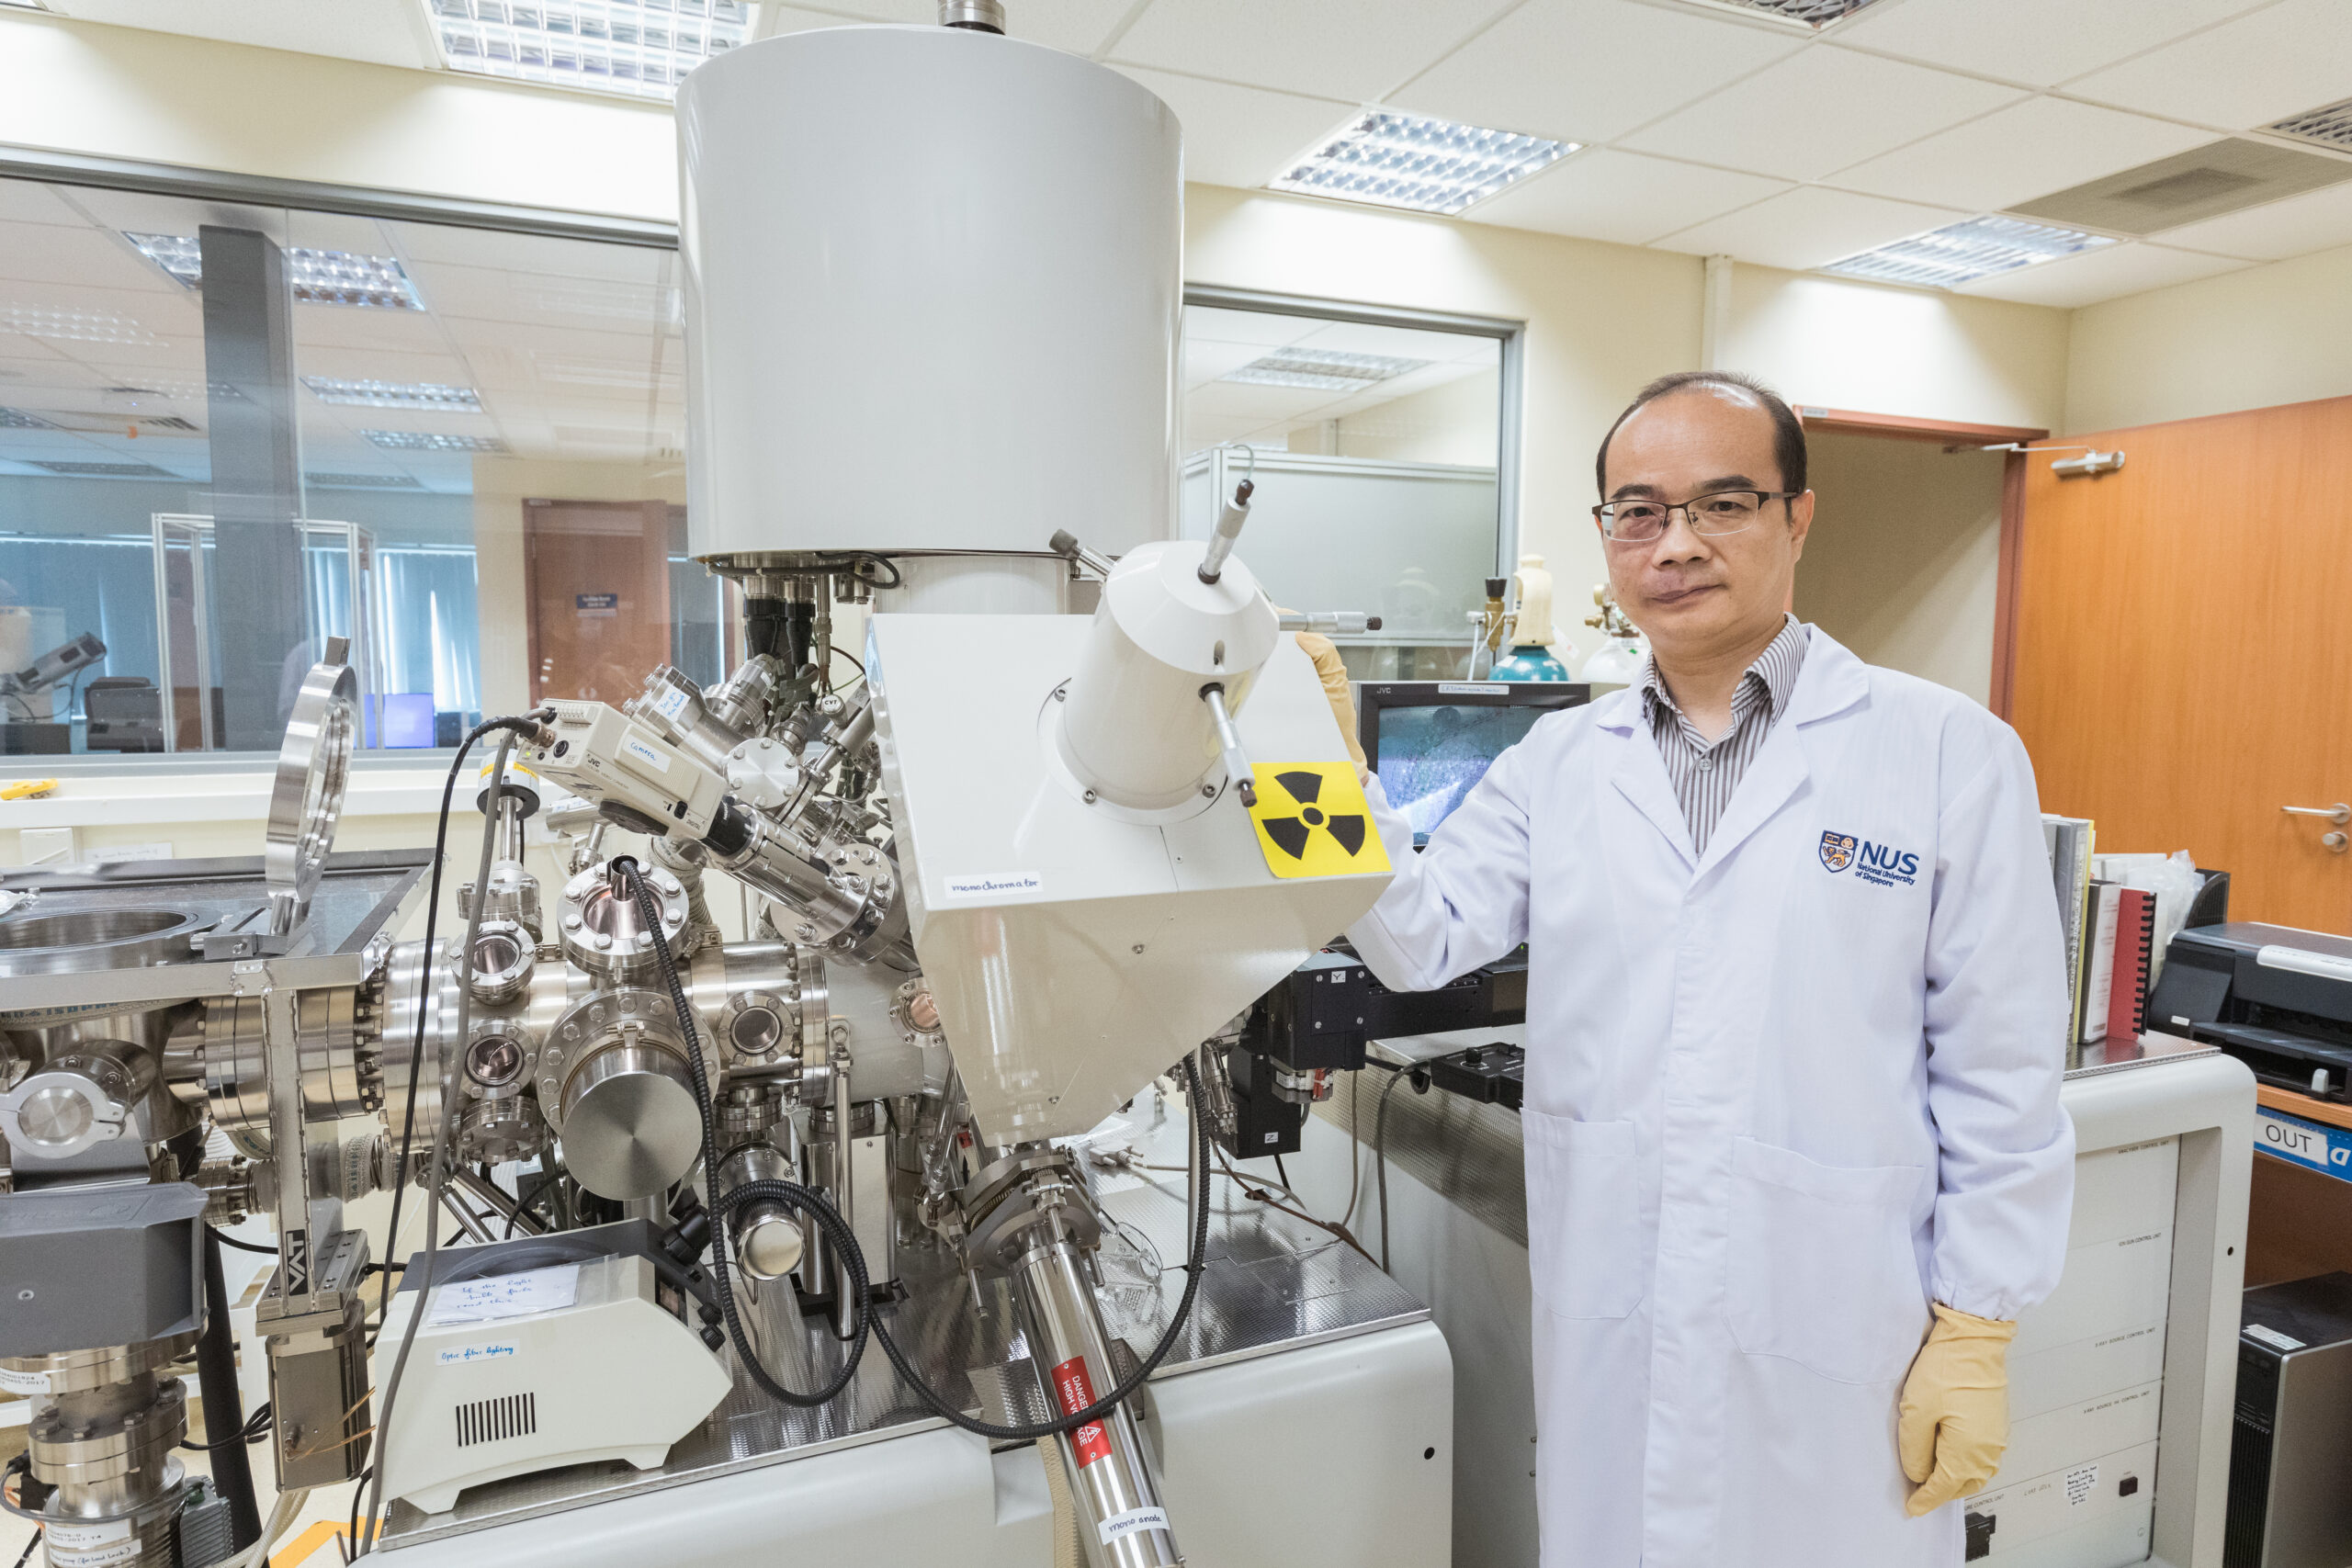 The groundbreaking discovery made by Assoc Prof Xue Jun Min and his team could improve affordability of hydrogen as source of clean energy.